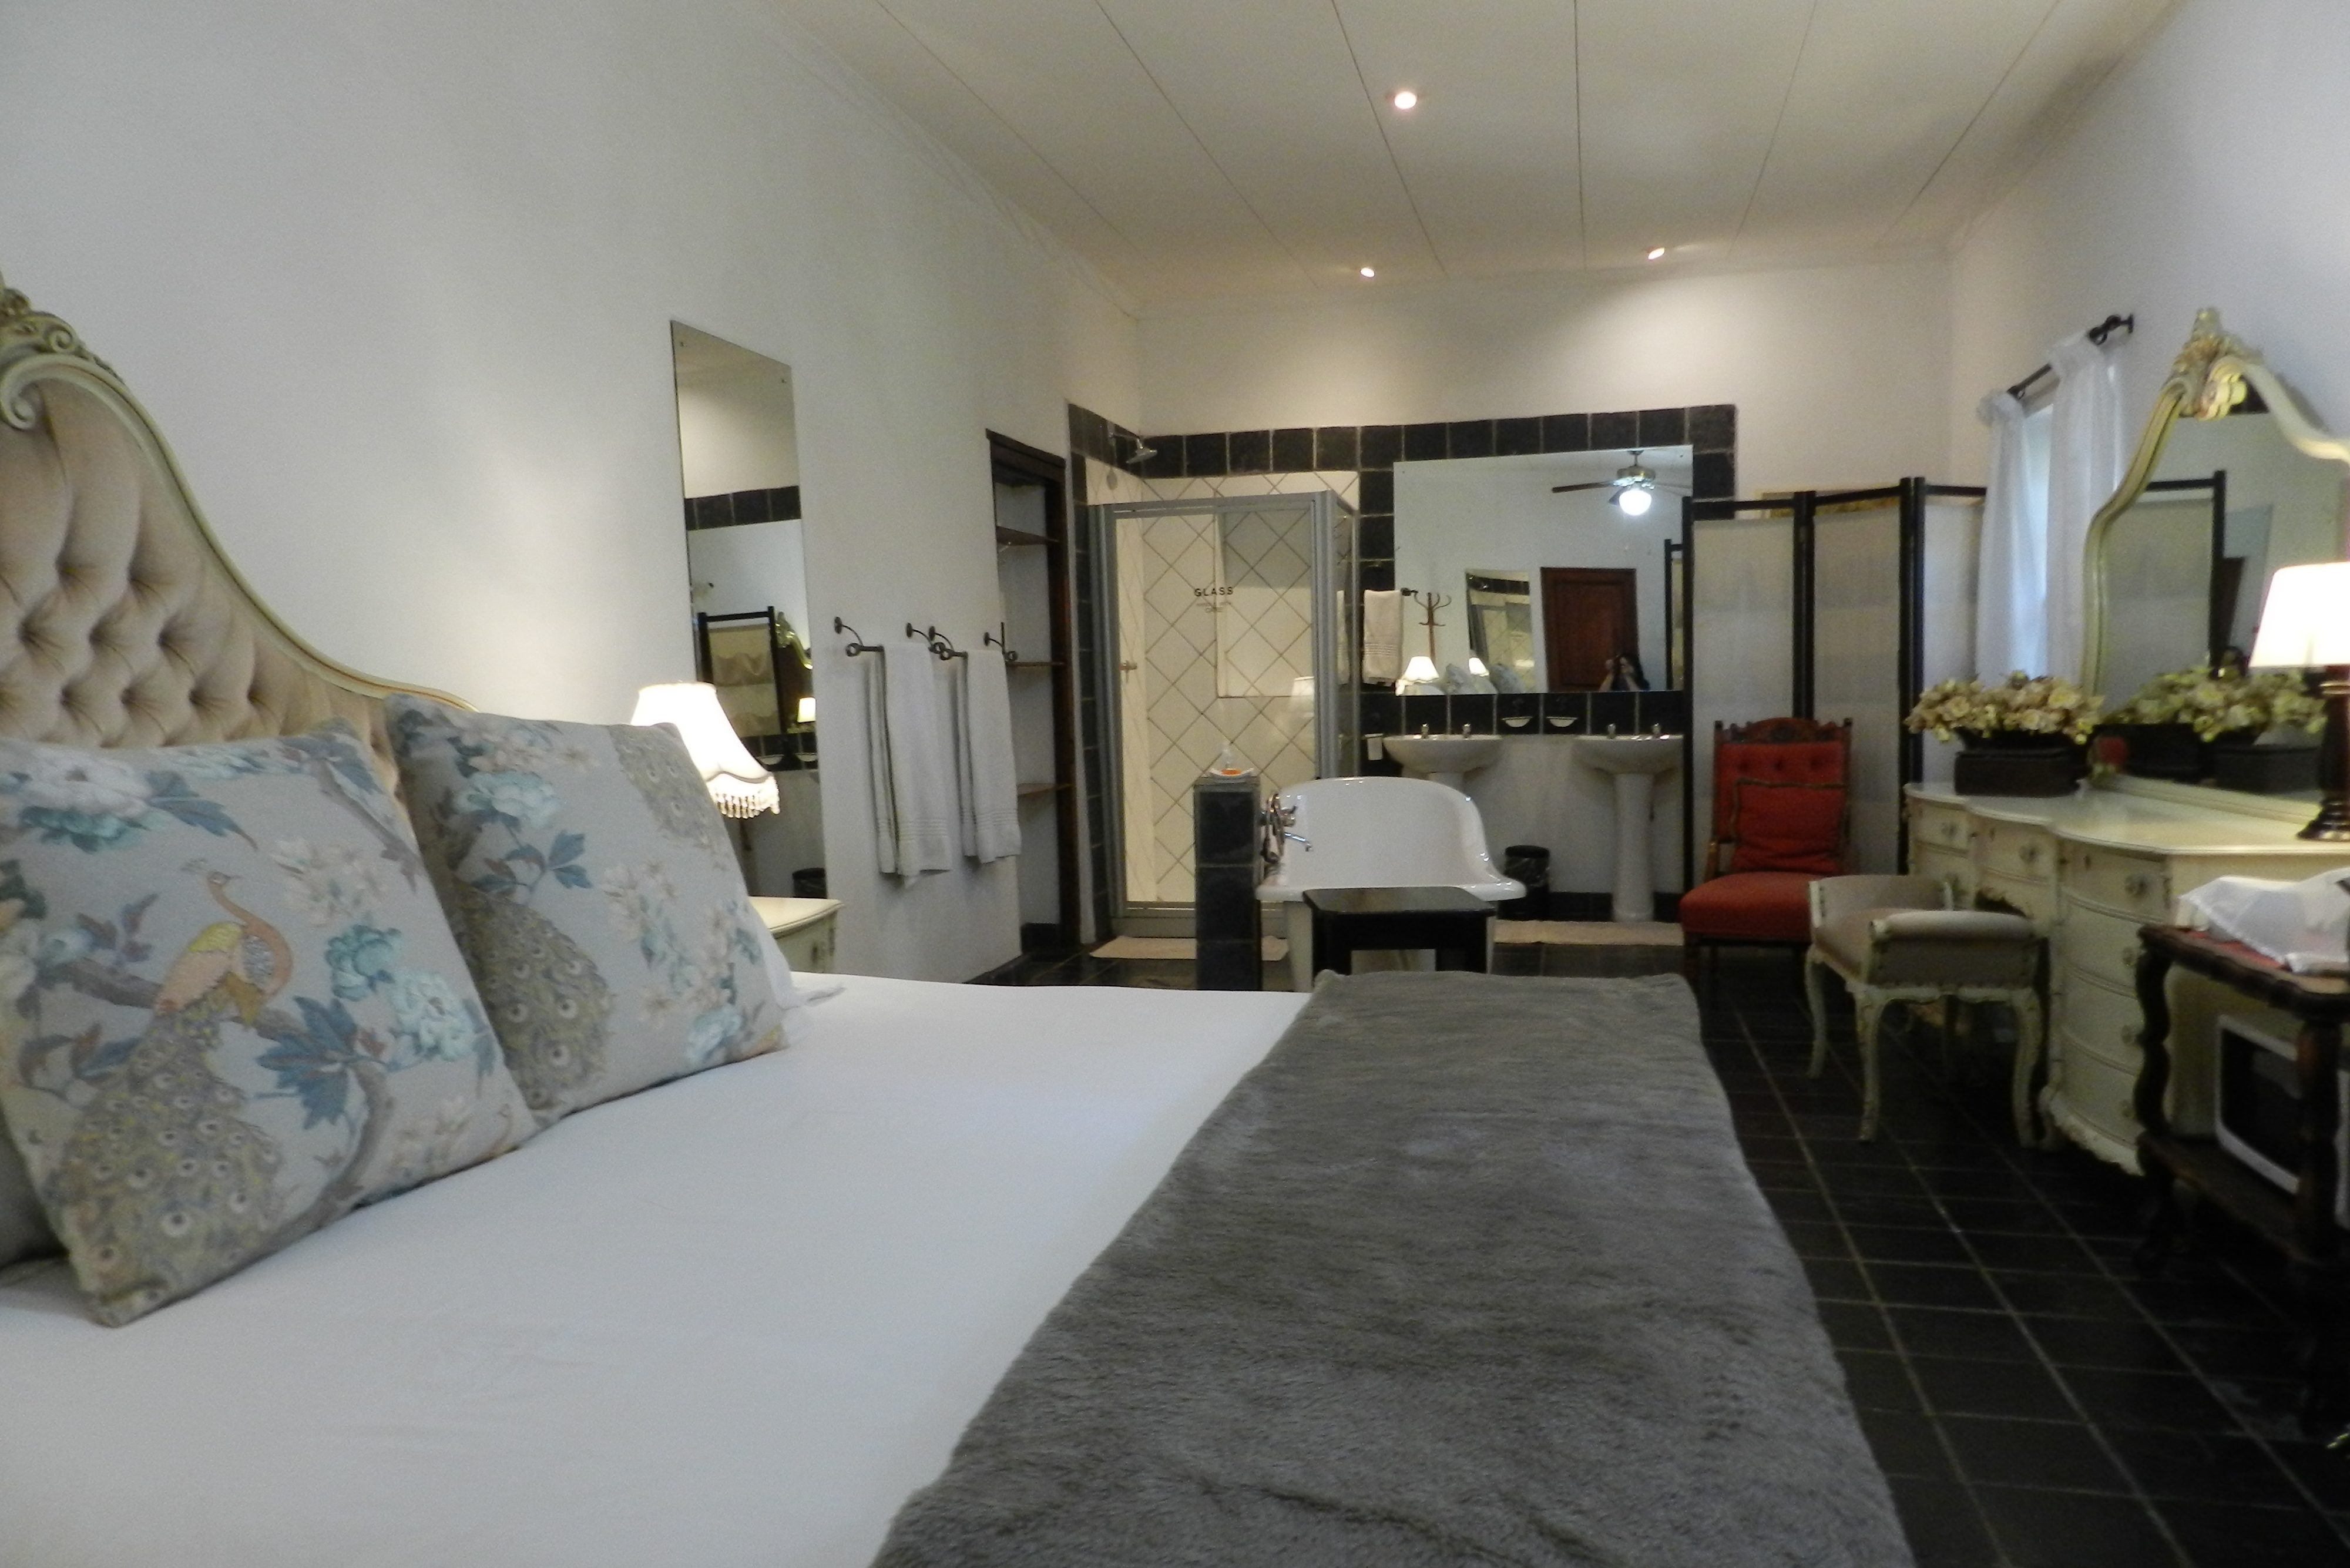 Full room view of bridal suite, Oom Paul & Tant Gezina, at the President Paul Kruger Guest Lodge, Rustenburg, South Africa